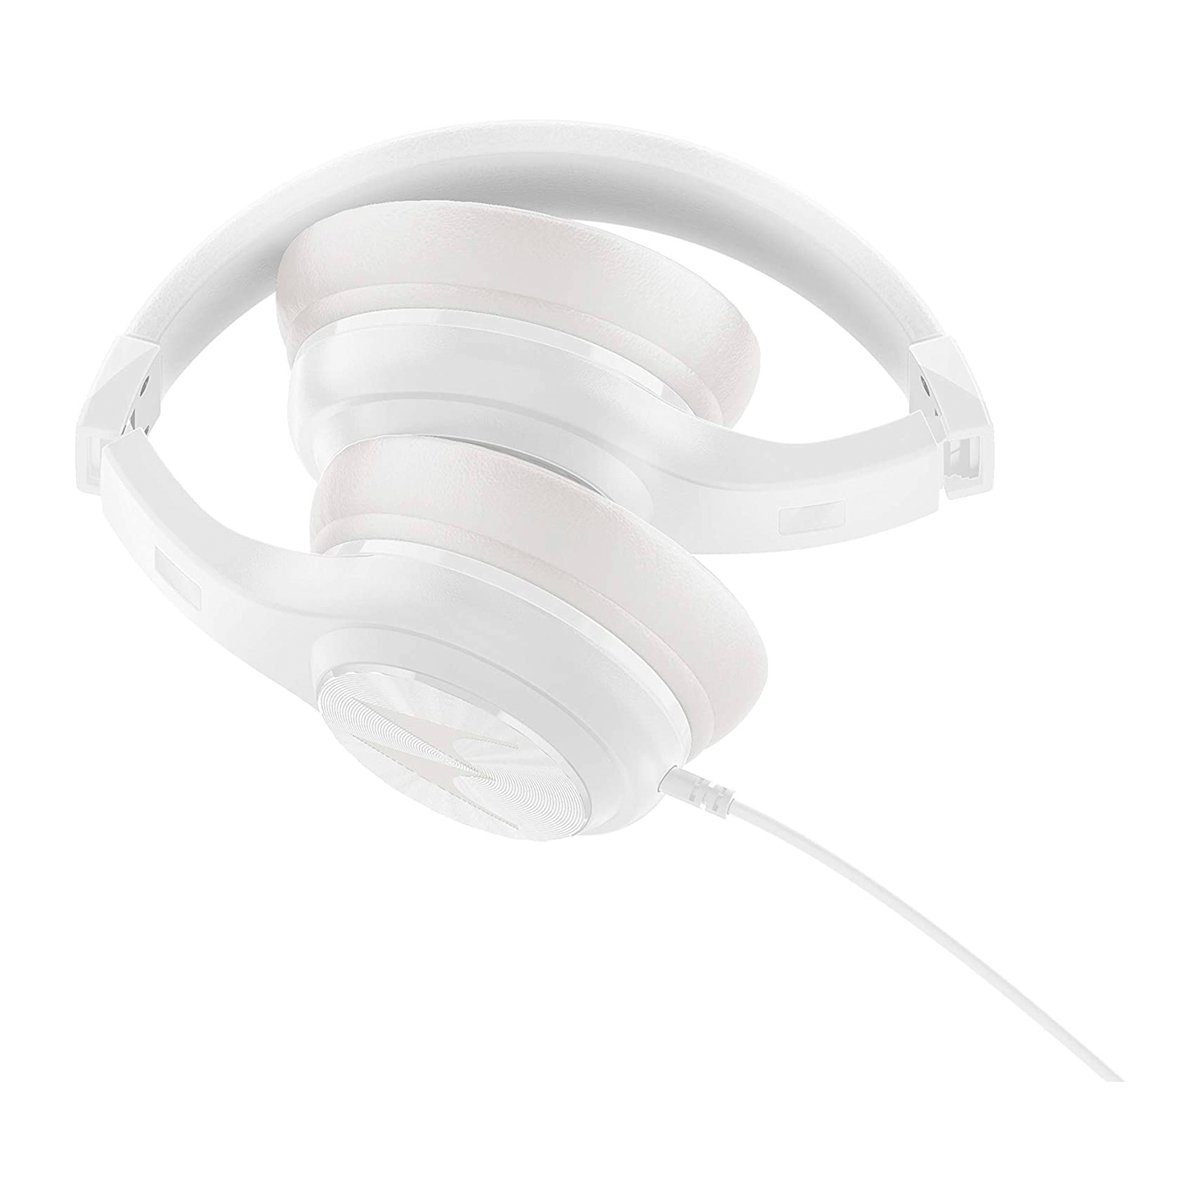 Motorola Pulse 120, Wired Headphones with Enhanced Bass, In-Line Mic and Voice Assistant Compatible with 3.5mm Aux, White